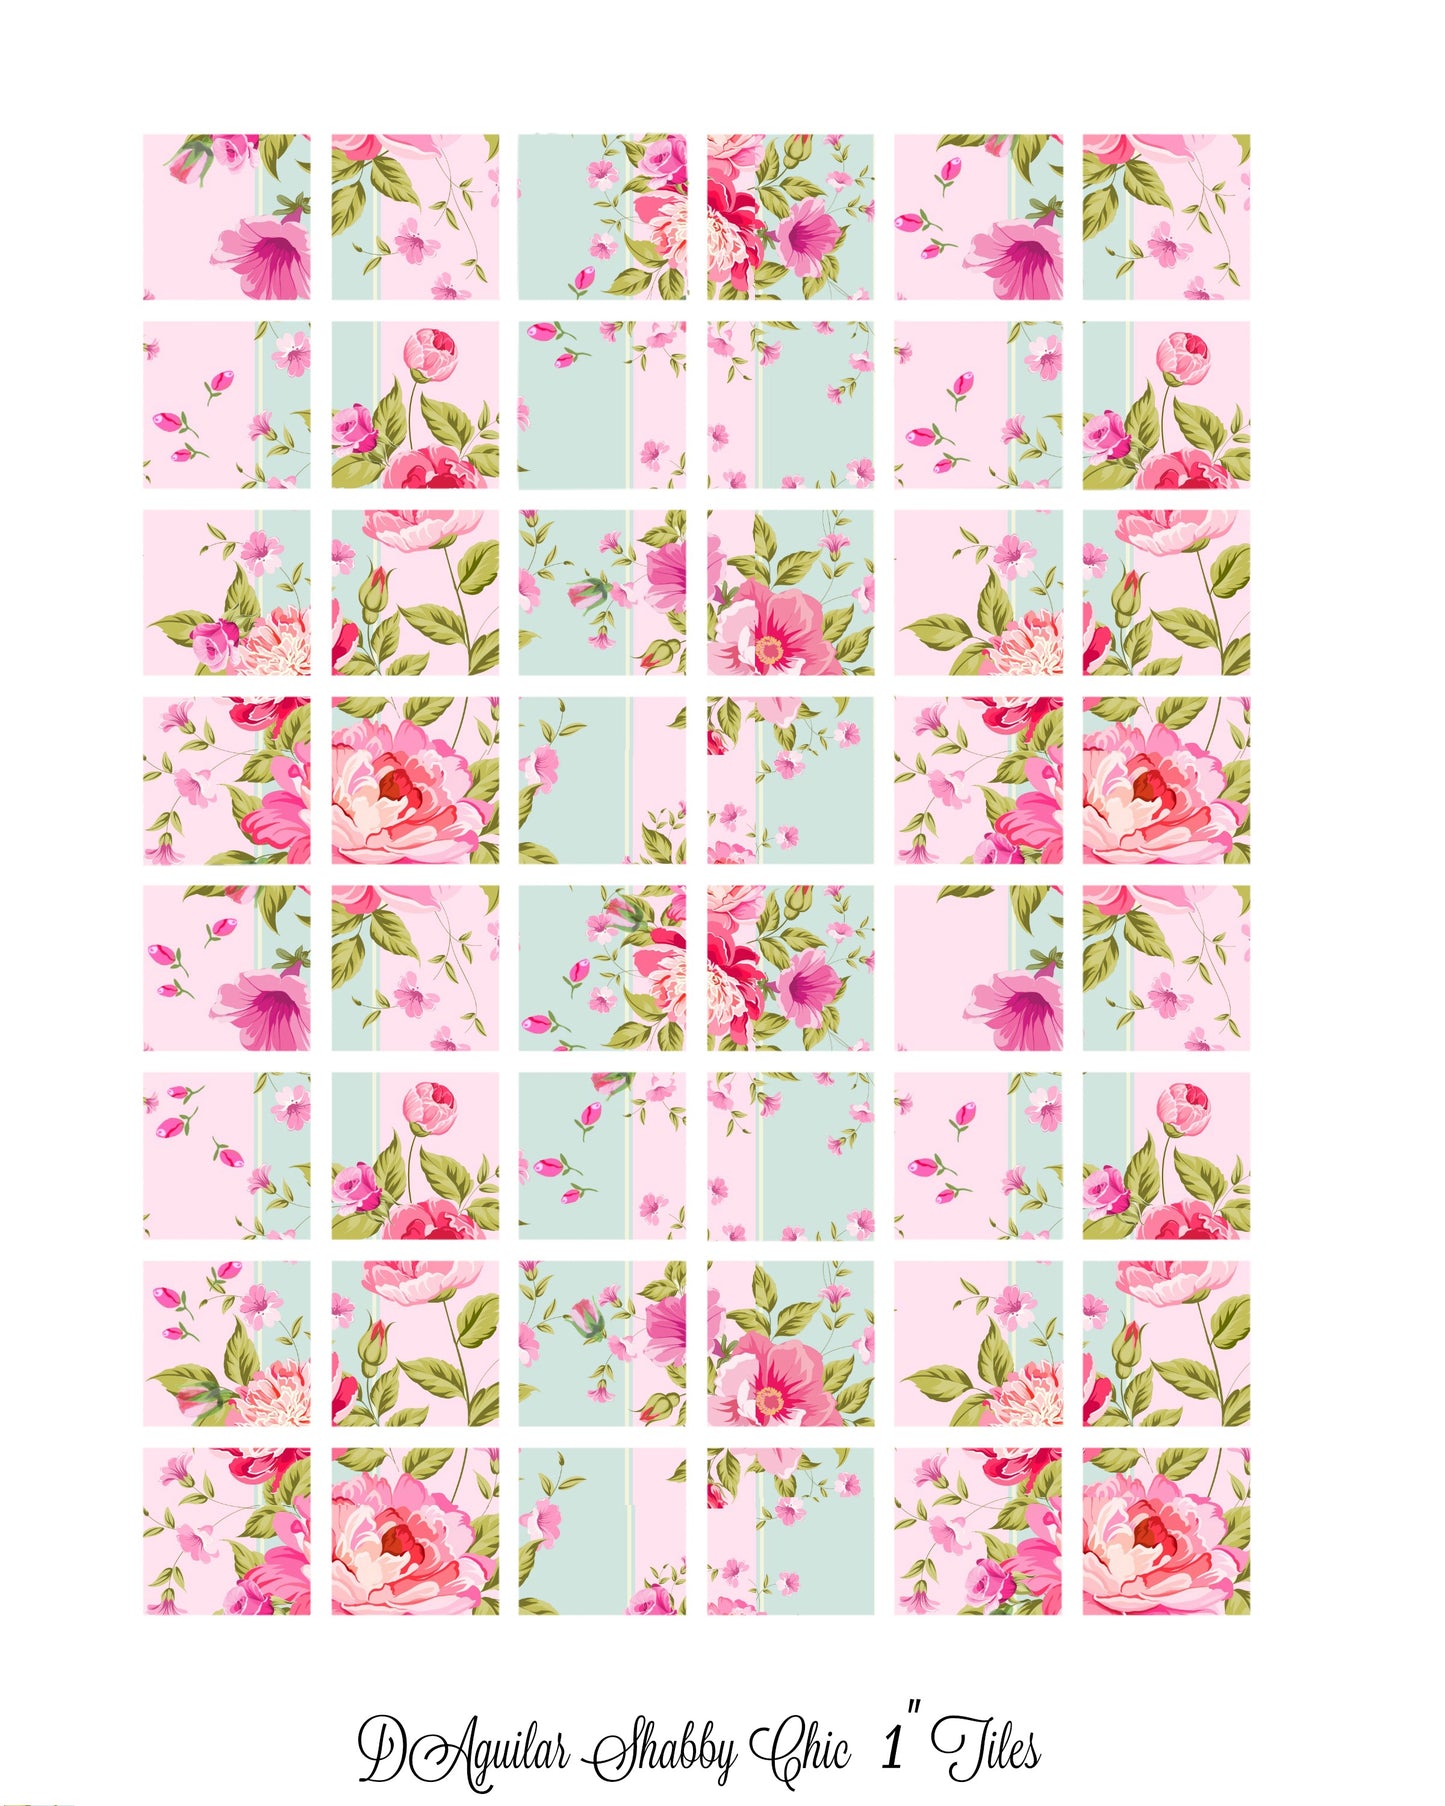 1" Square Tiles in Deb's Shabby Chic Pink Roses - Collage Sheet